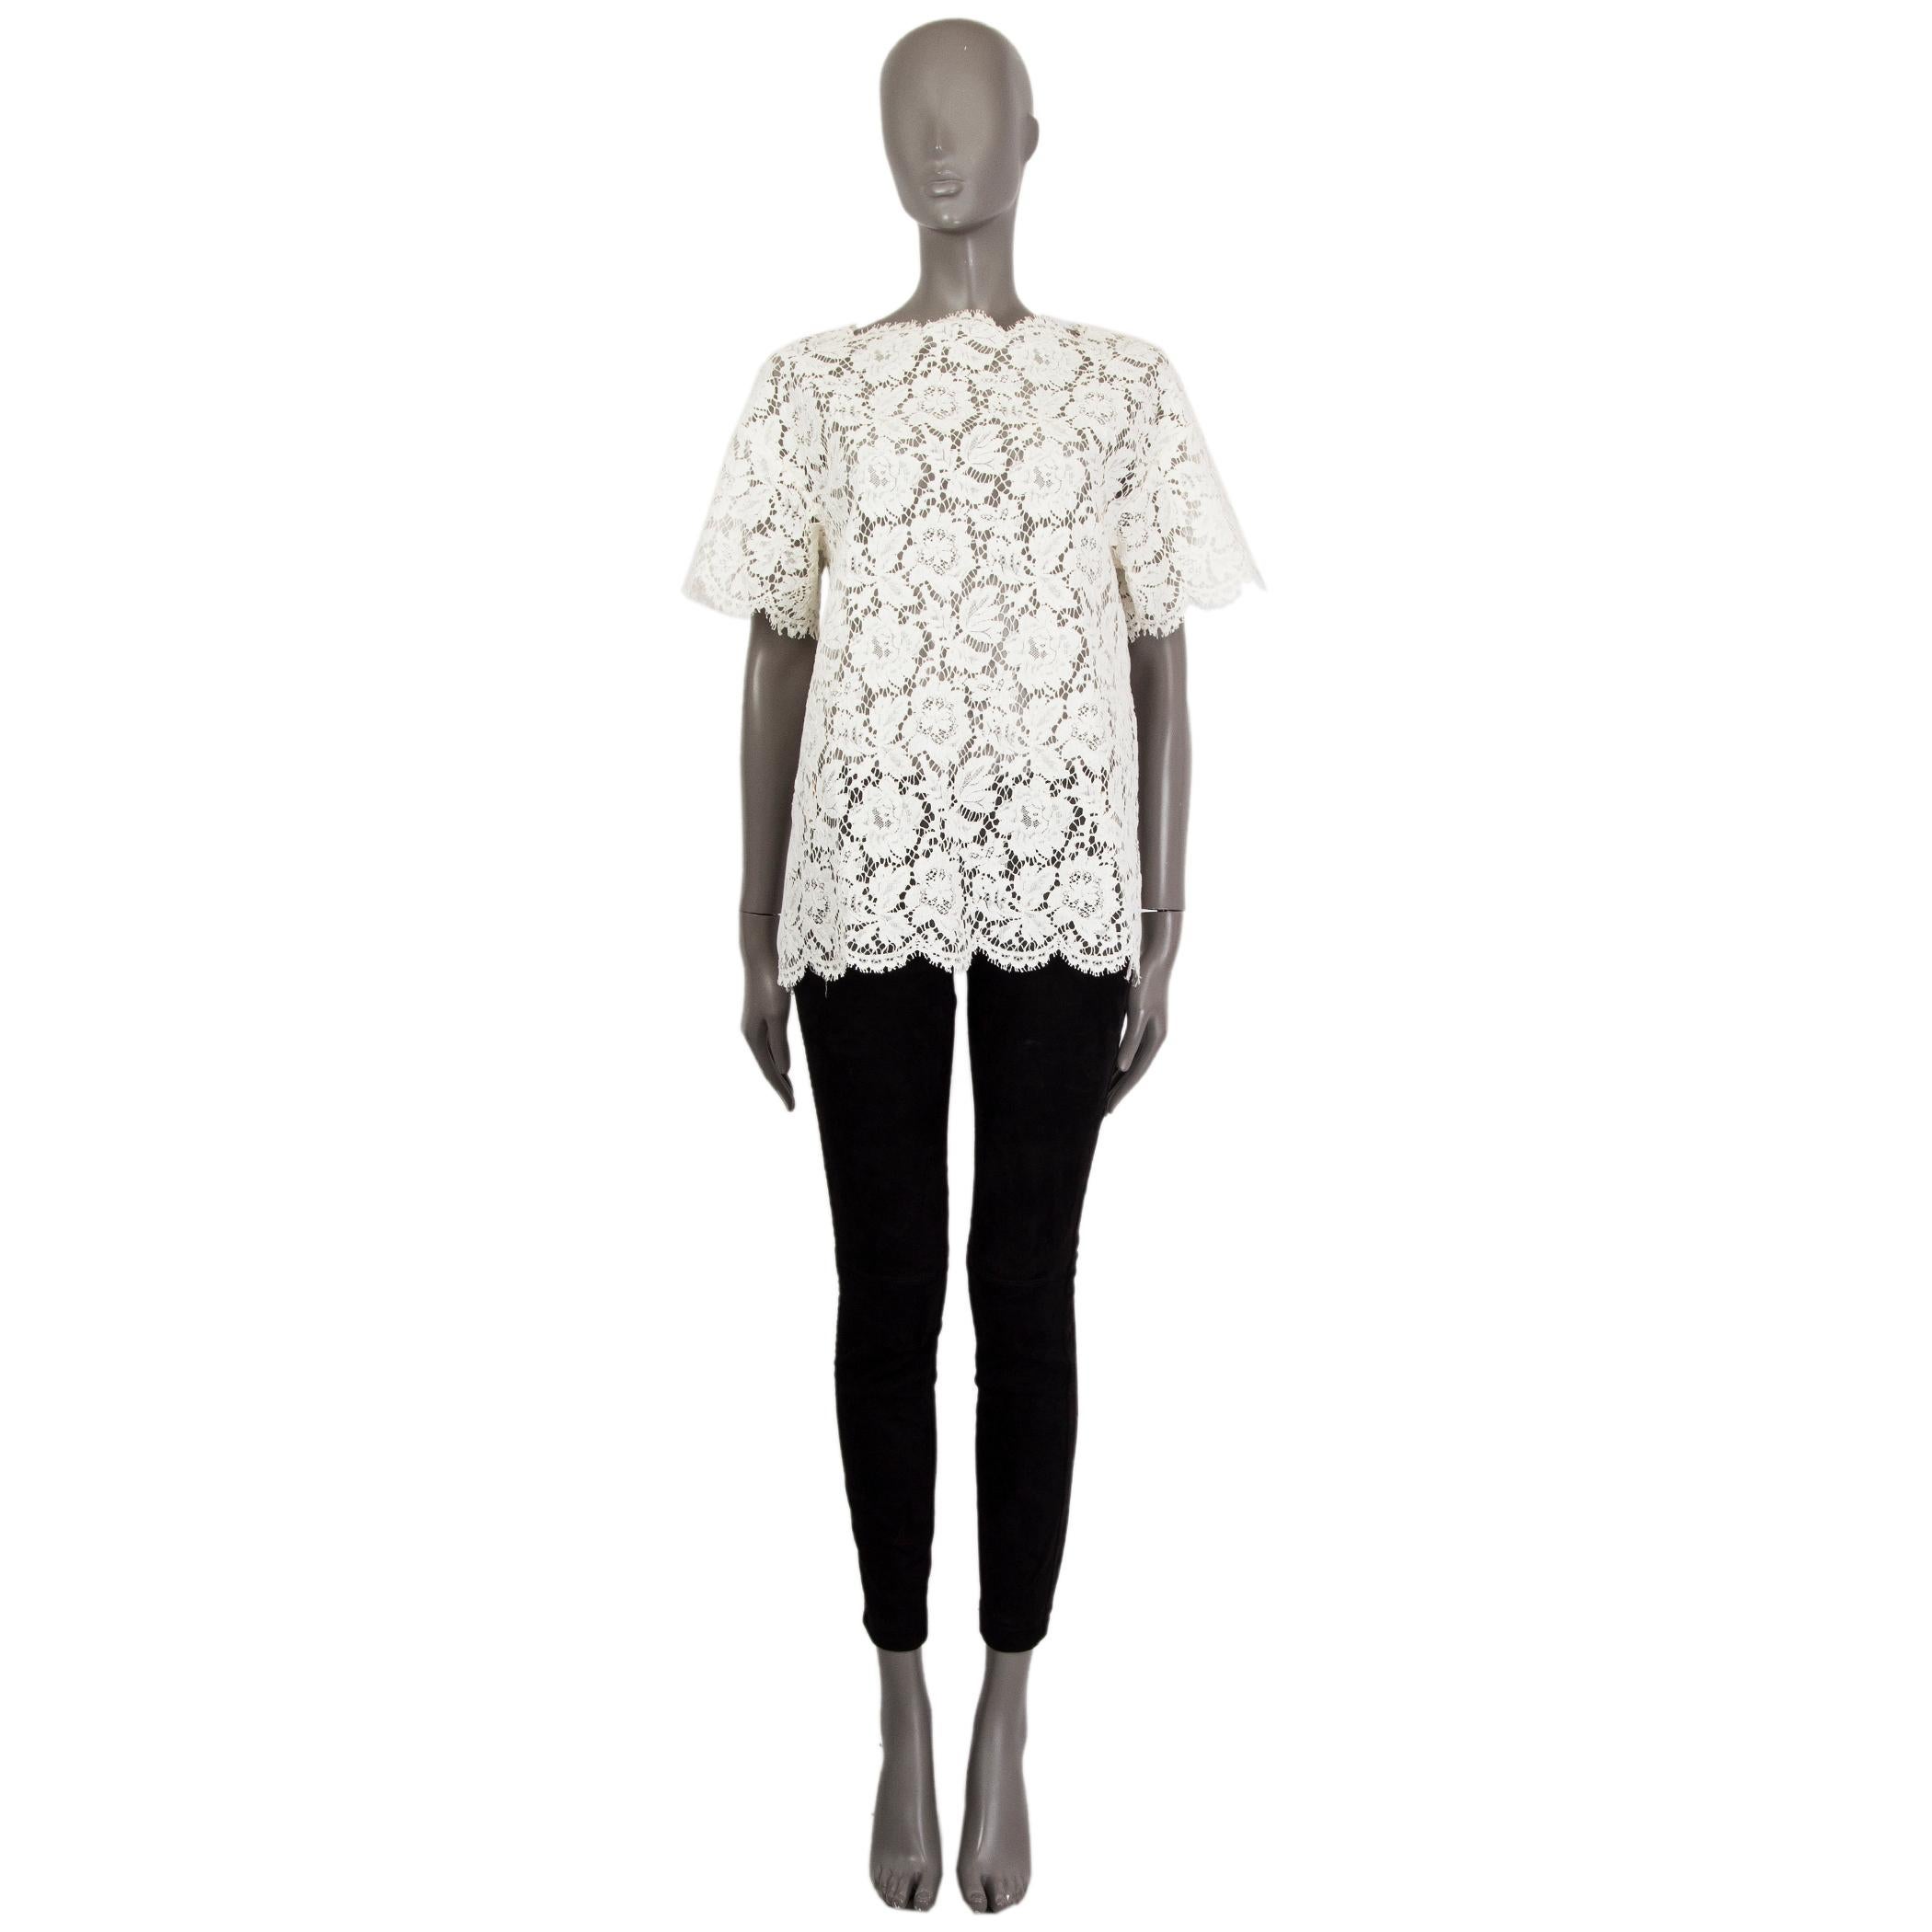 Valentino short-sleeve lace-top in off-white cotton-viscose blend (assumed as tag is missing) with a jewel-neck. Has two slits with bows on the back. Lined in polyamide (assumed as tag is missing). Has been worn and is in excellent condition. 

Tag